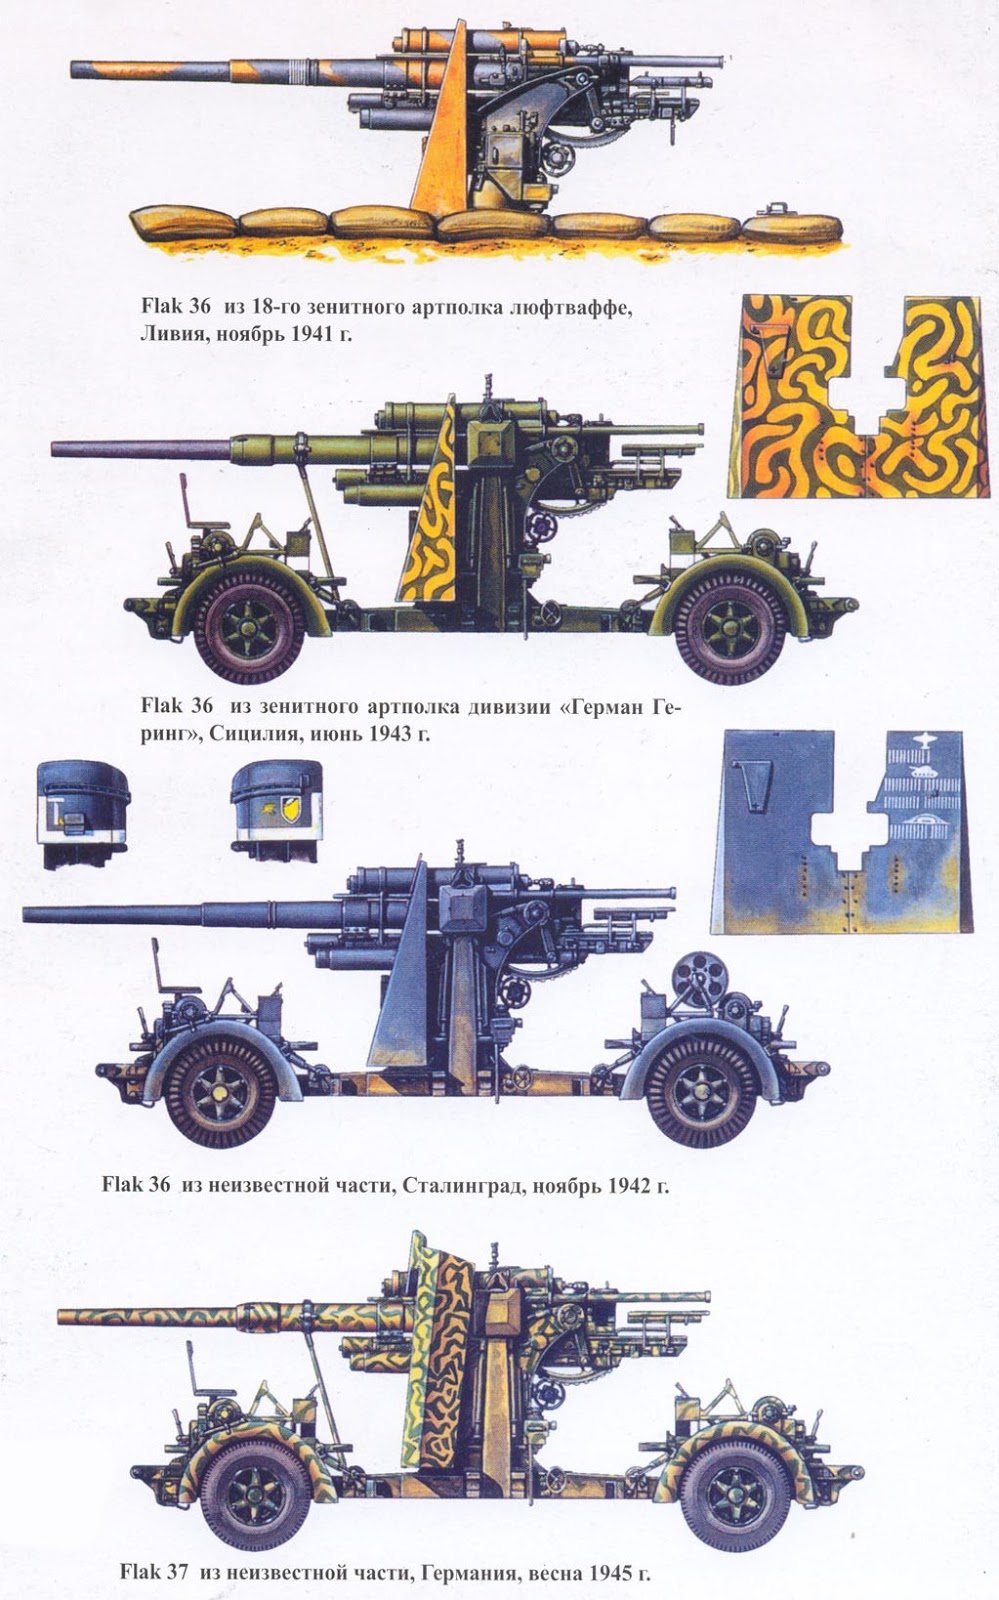 War Machines And Weapons 88mm Flak 1939 1945